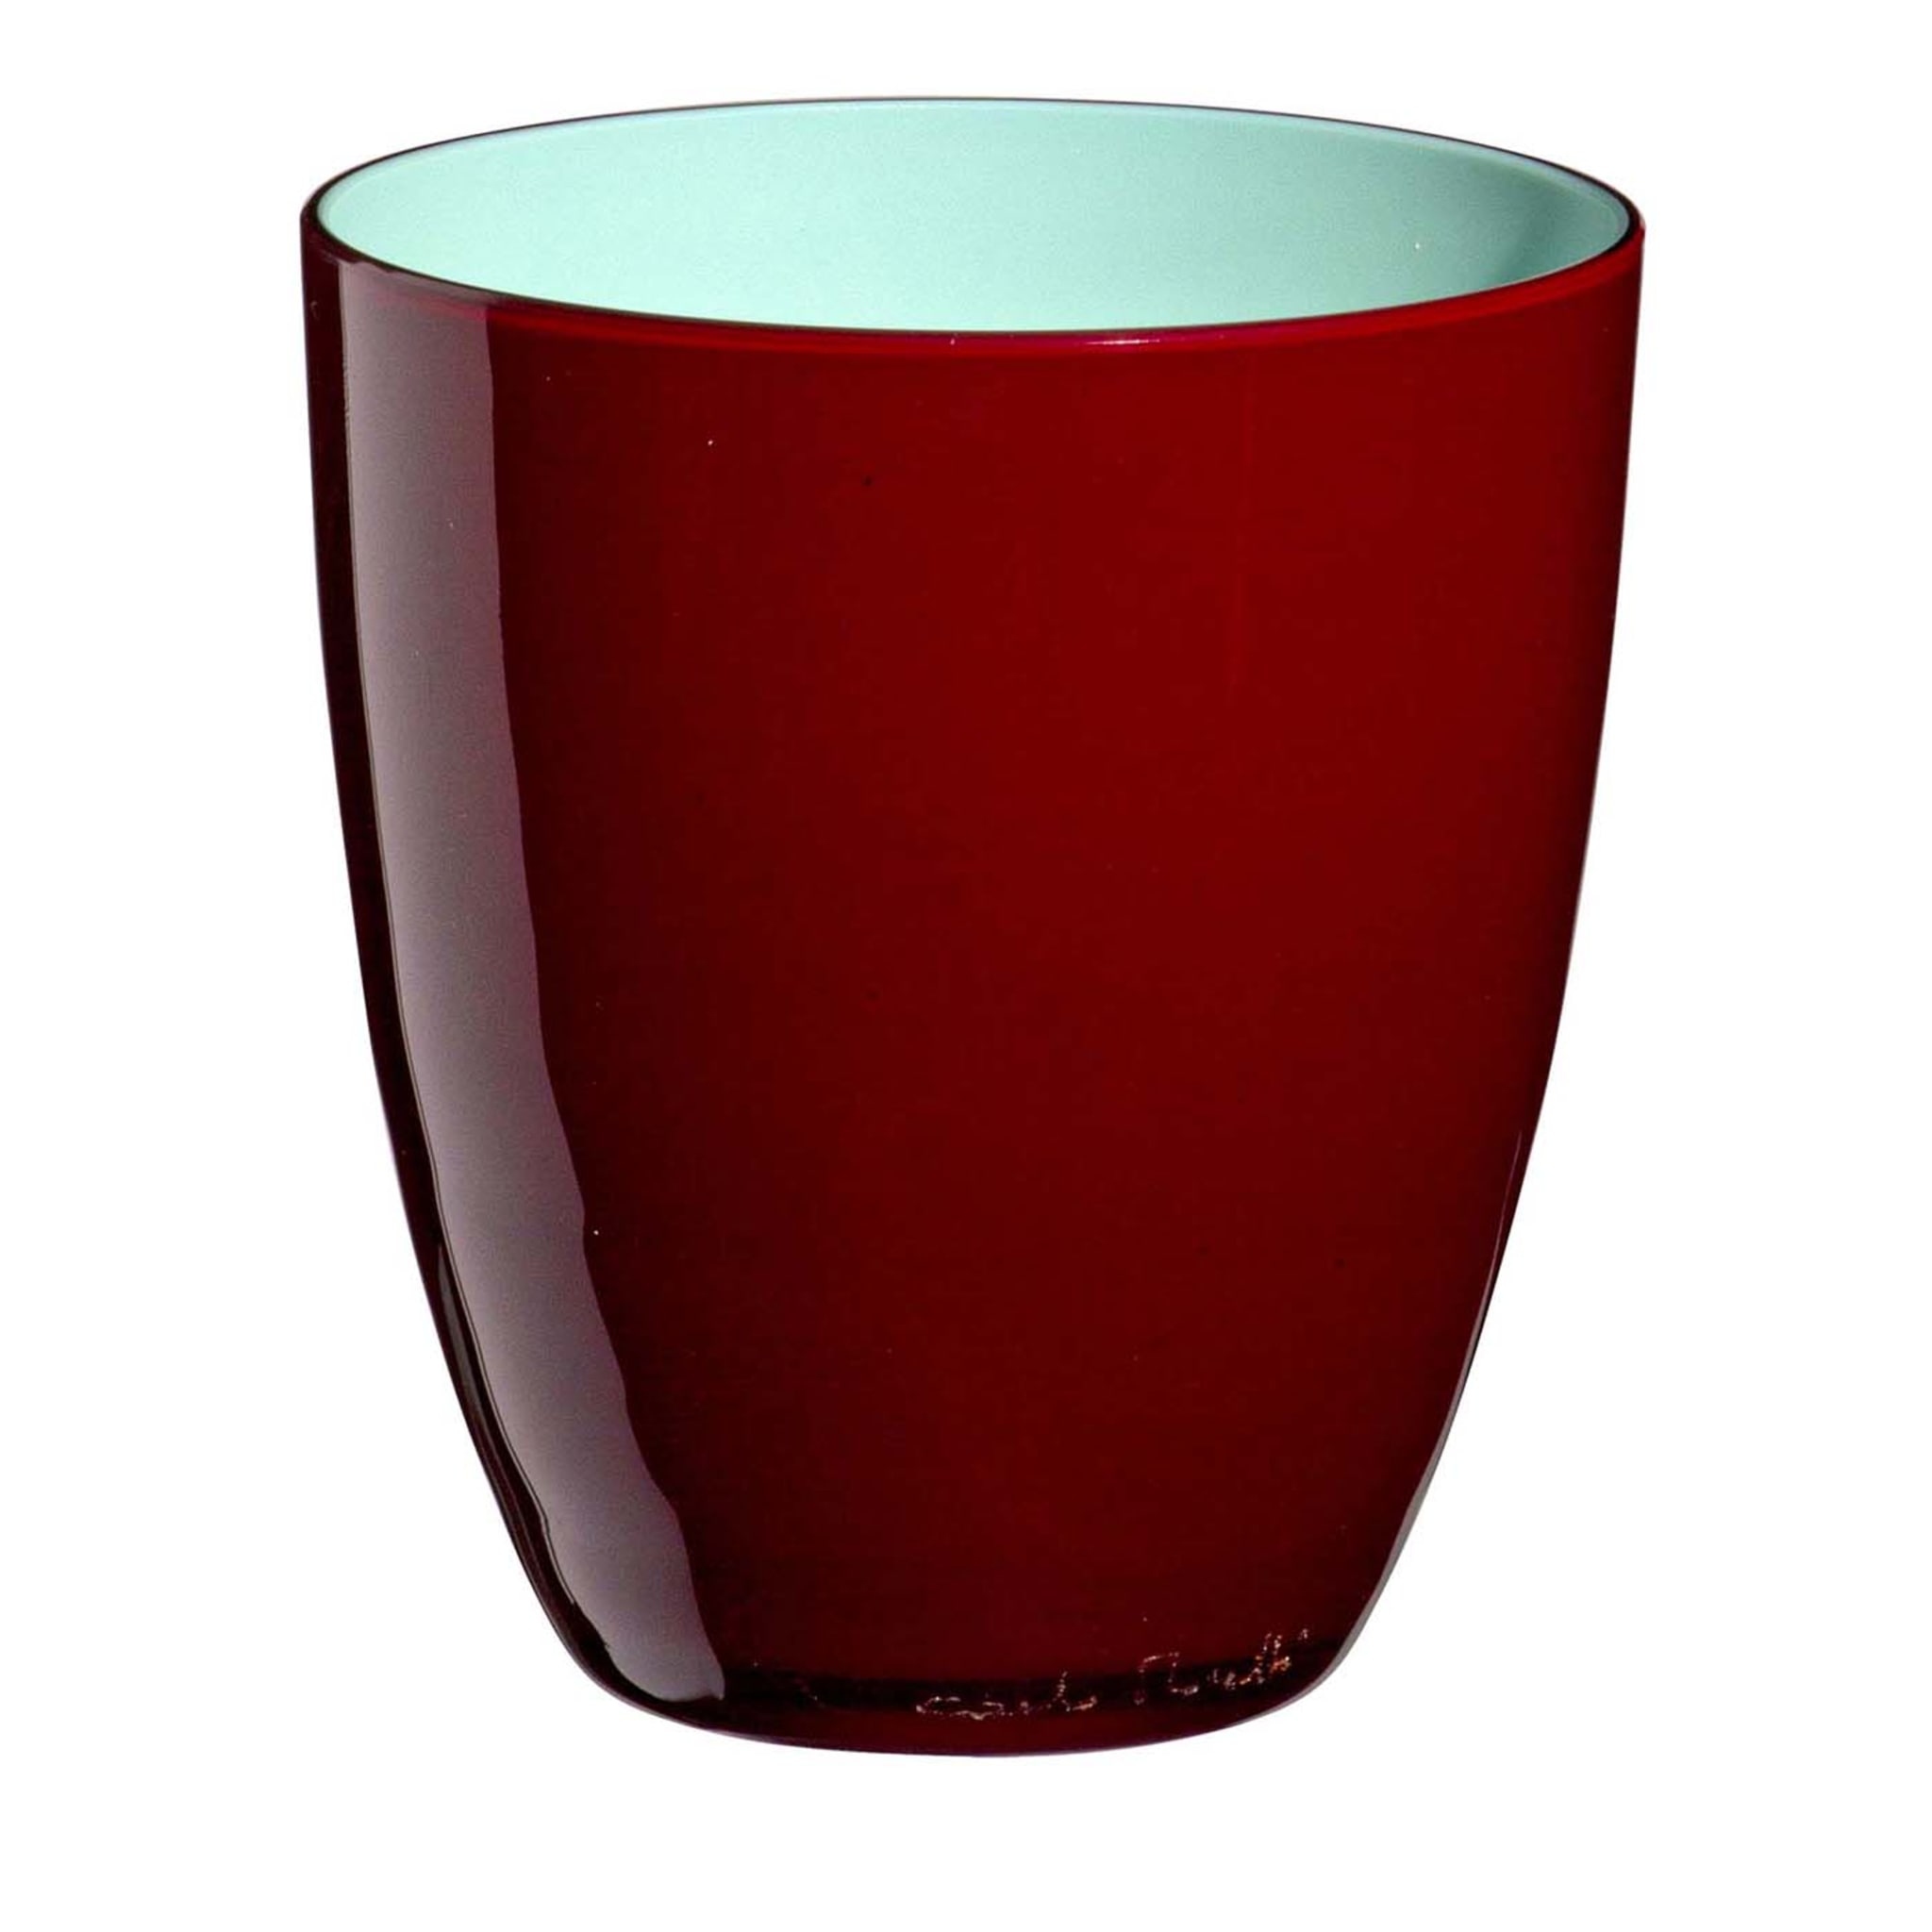 Pirus Red and Turquoise Glass by Carlo Moretti - Main view